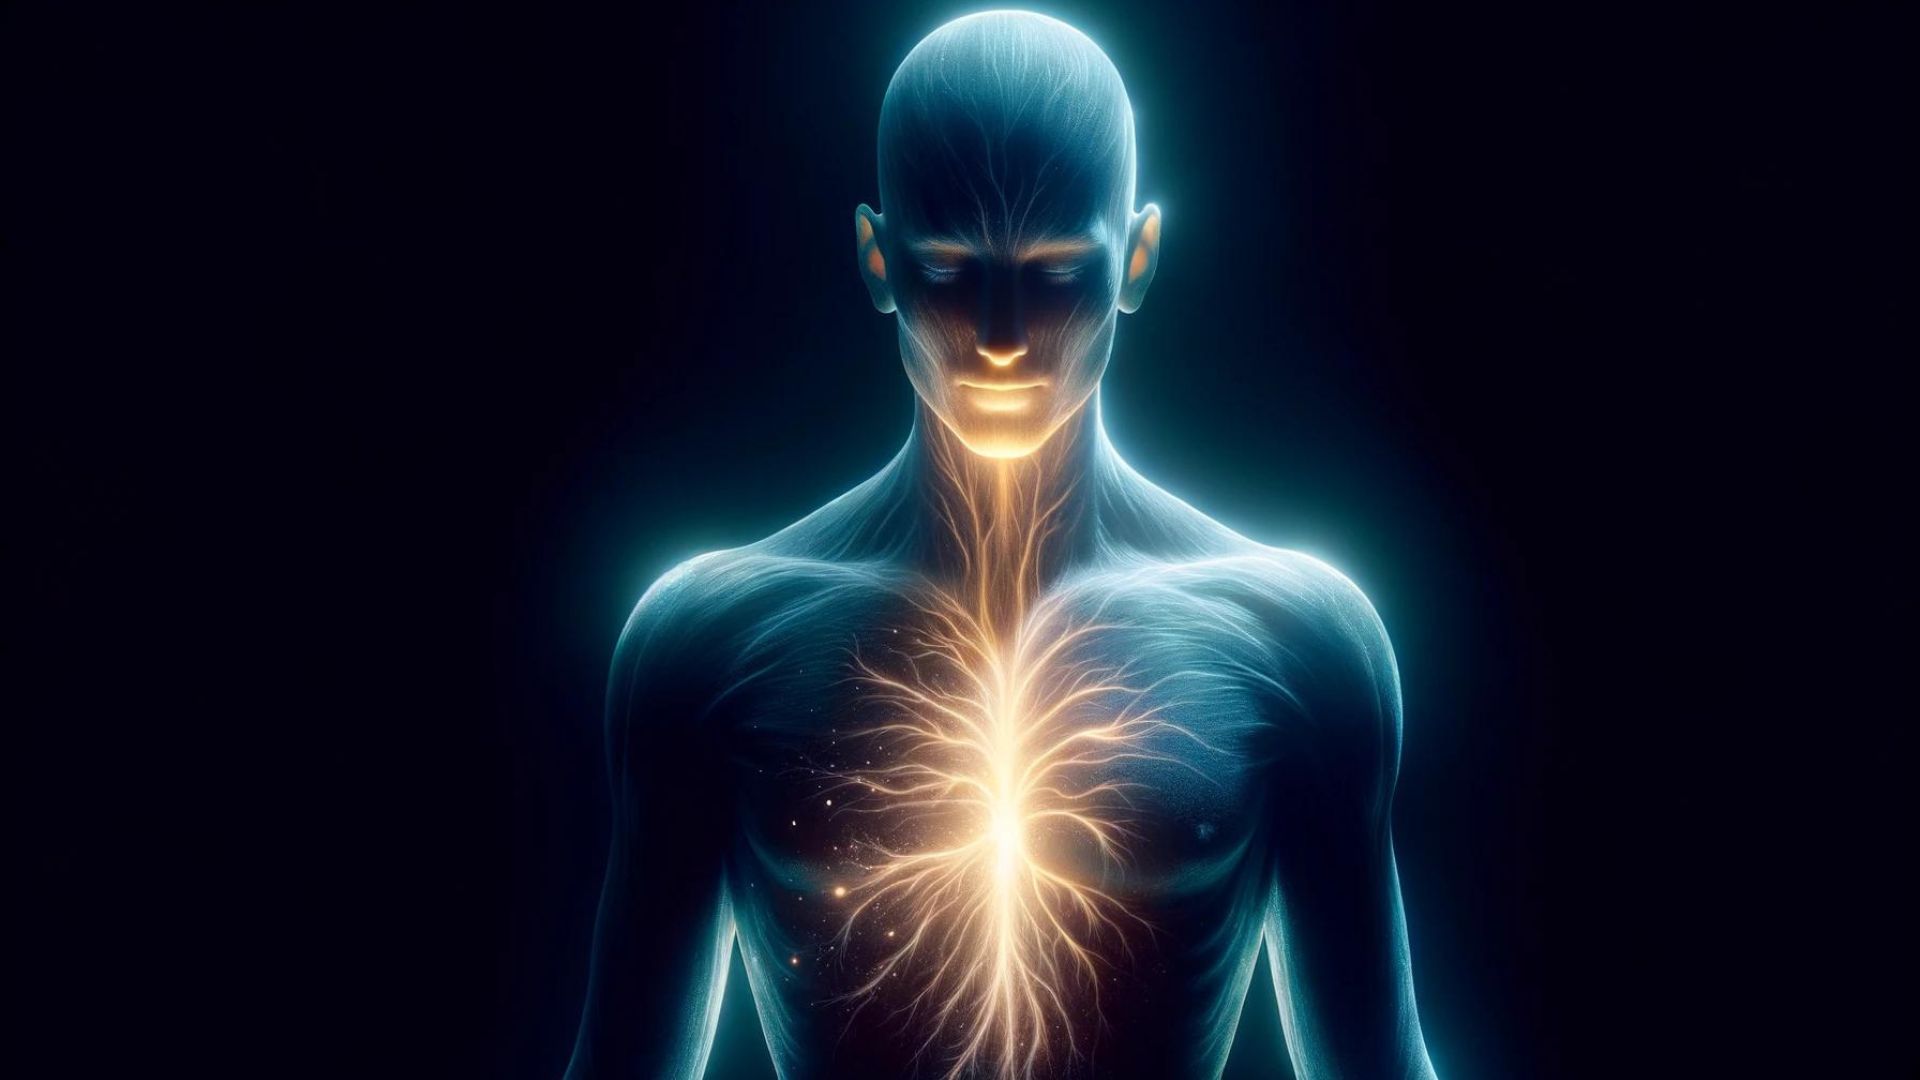 Did you know the human body emits a small amount of visible light